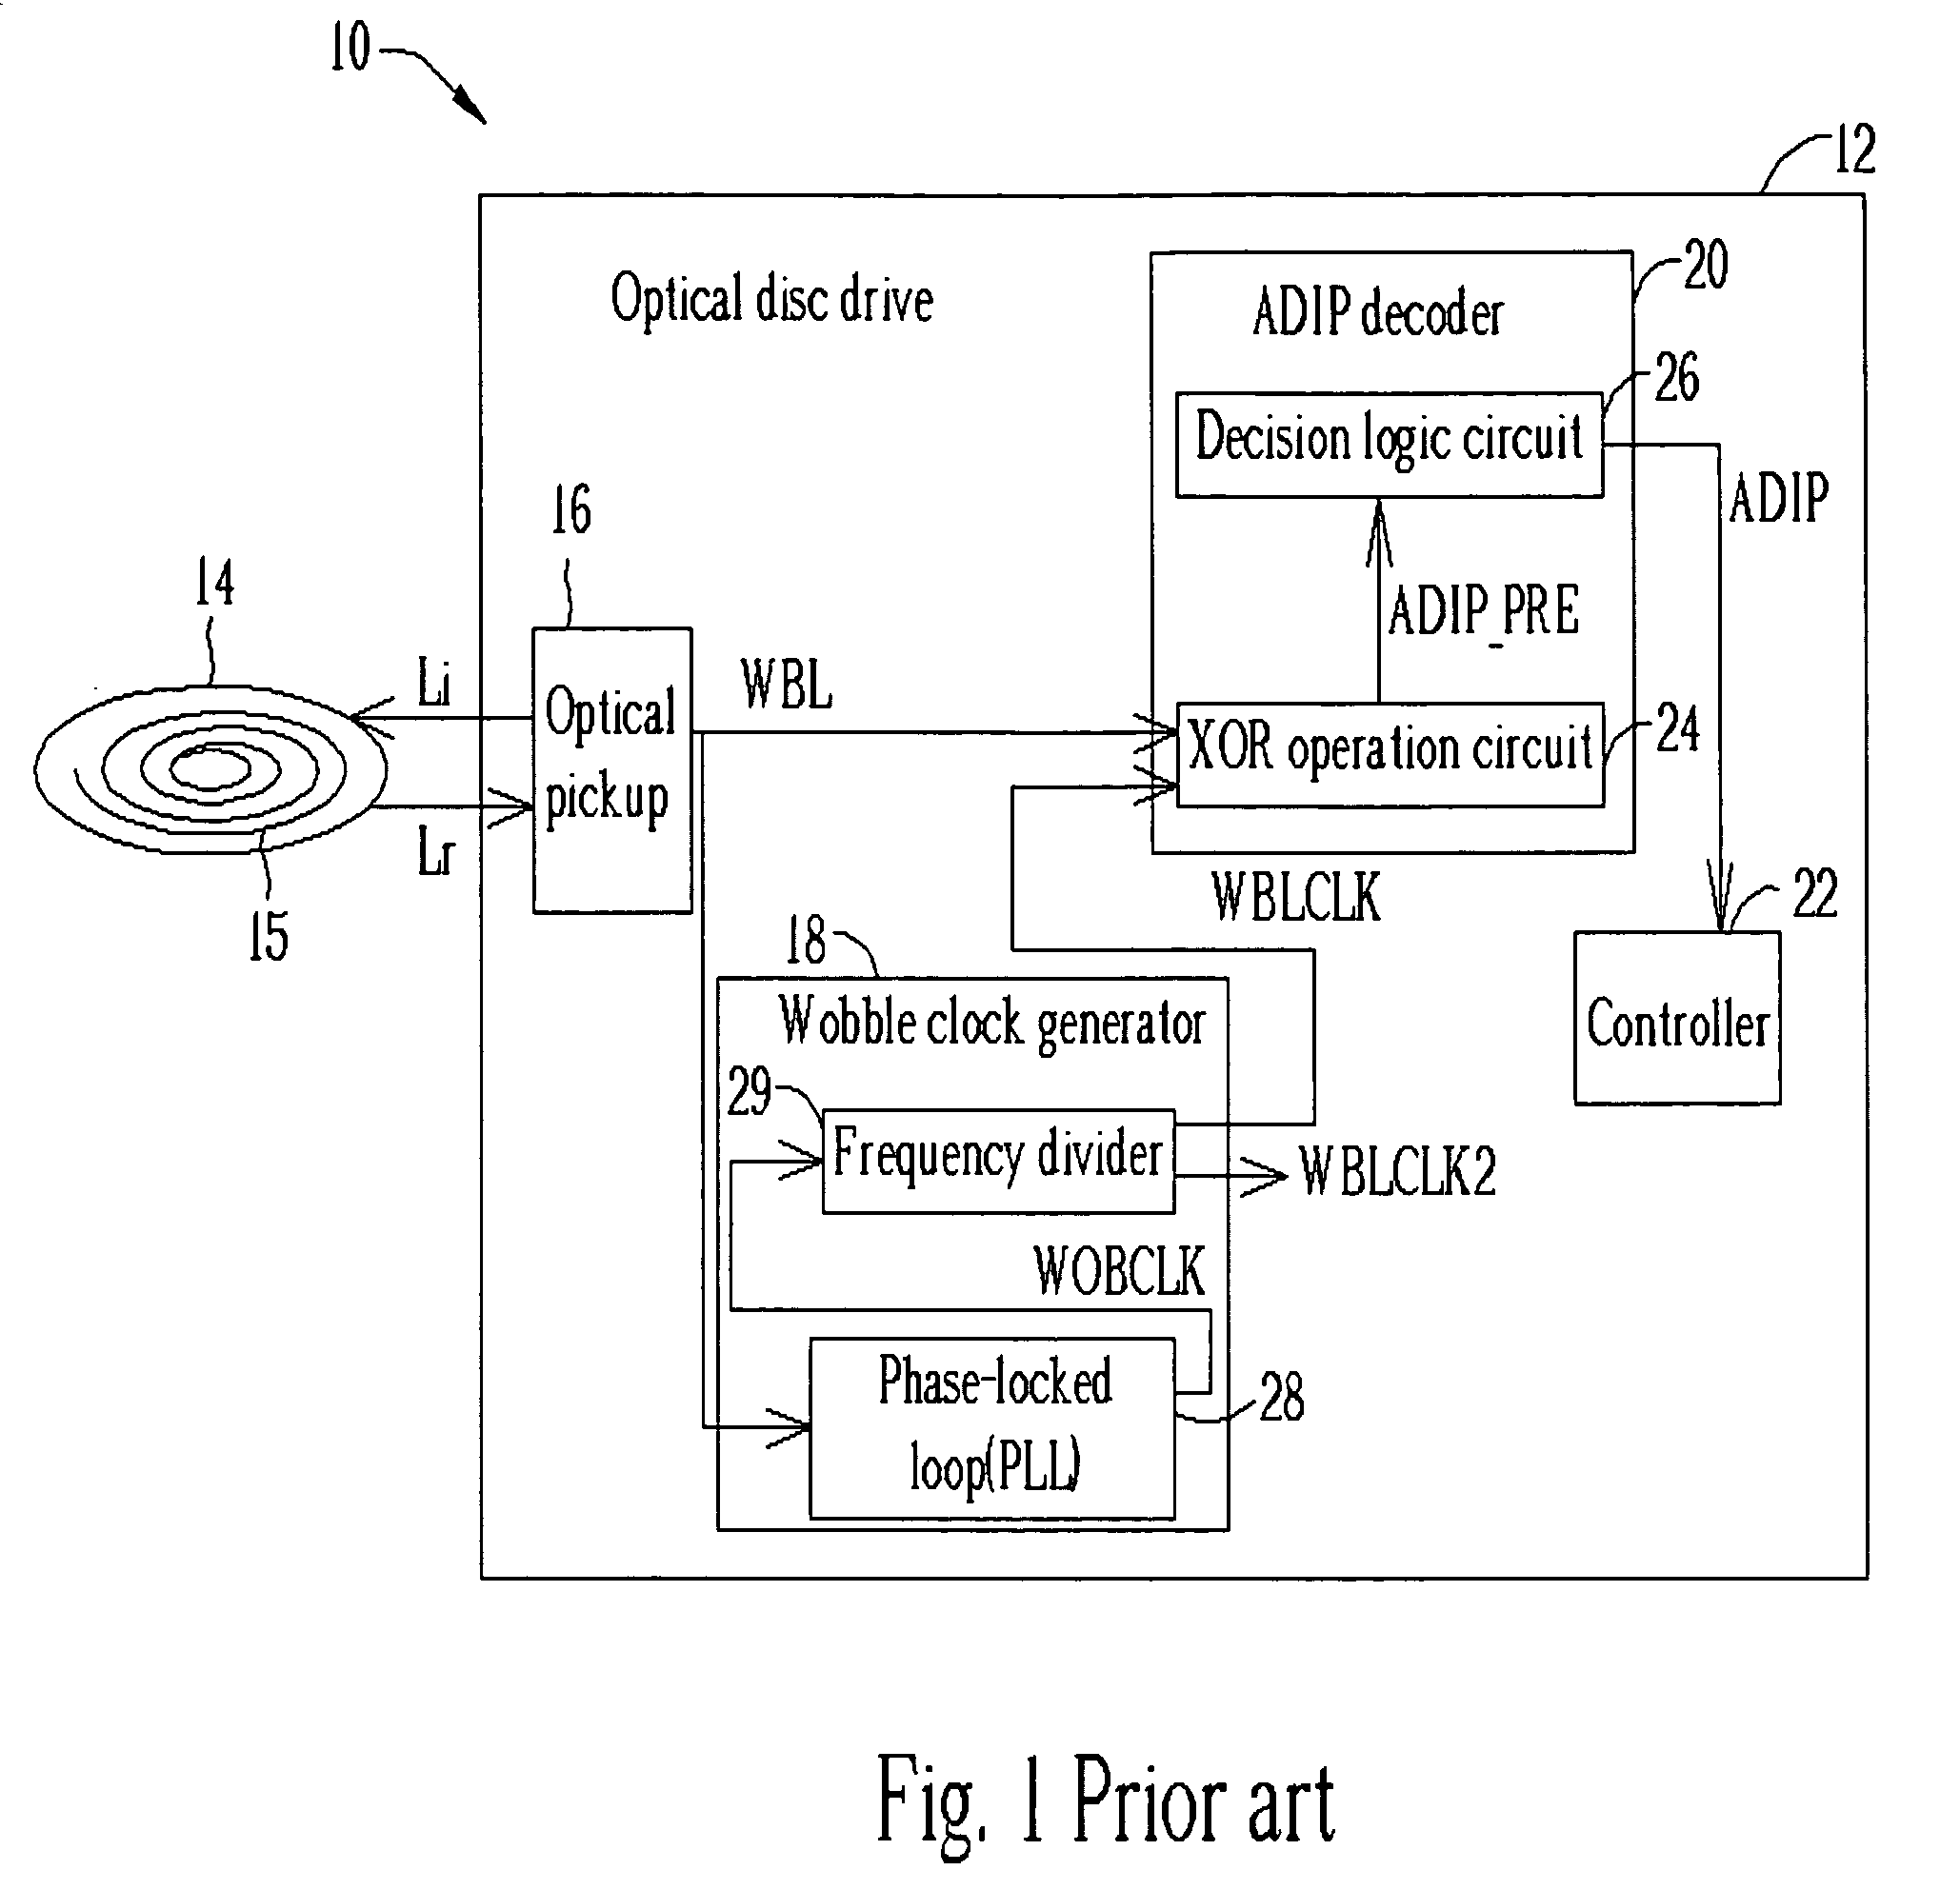 Method of determining ADIP information through counting identical bits and different bits